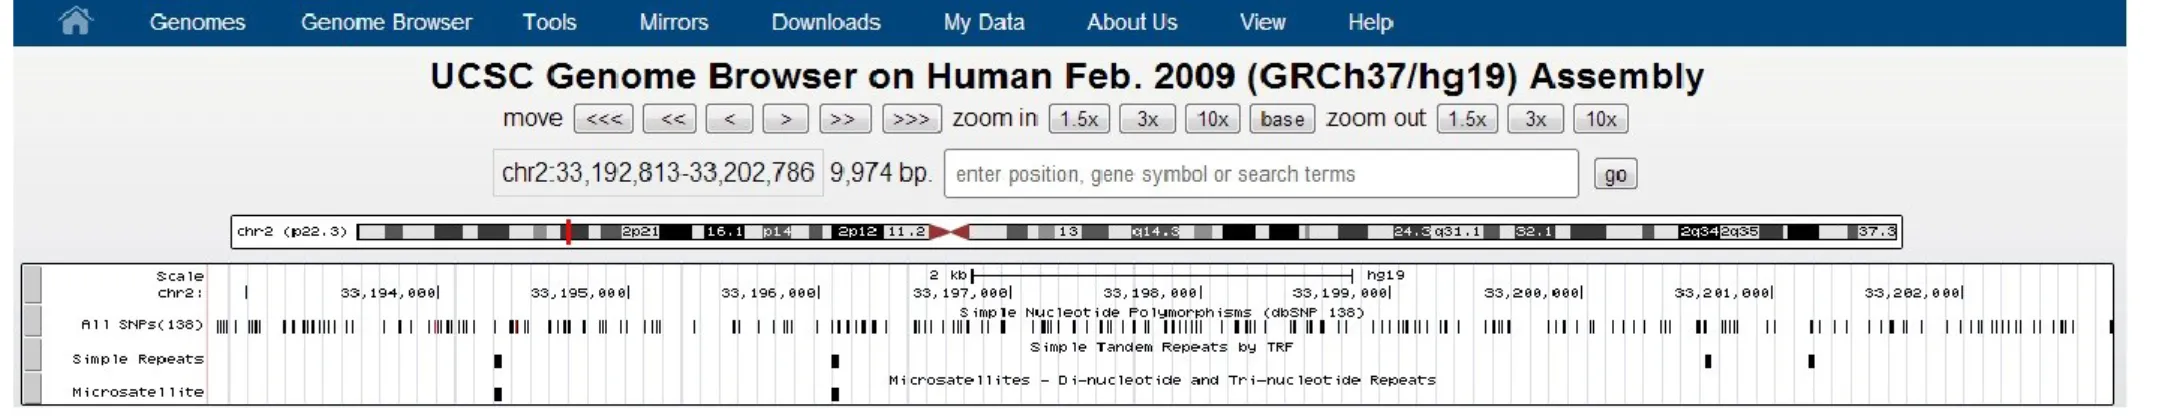 Figure 1. Genetic variability along a stretch of 10,000 bp in Human genome (http://genome.ucsc.edu/) 